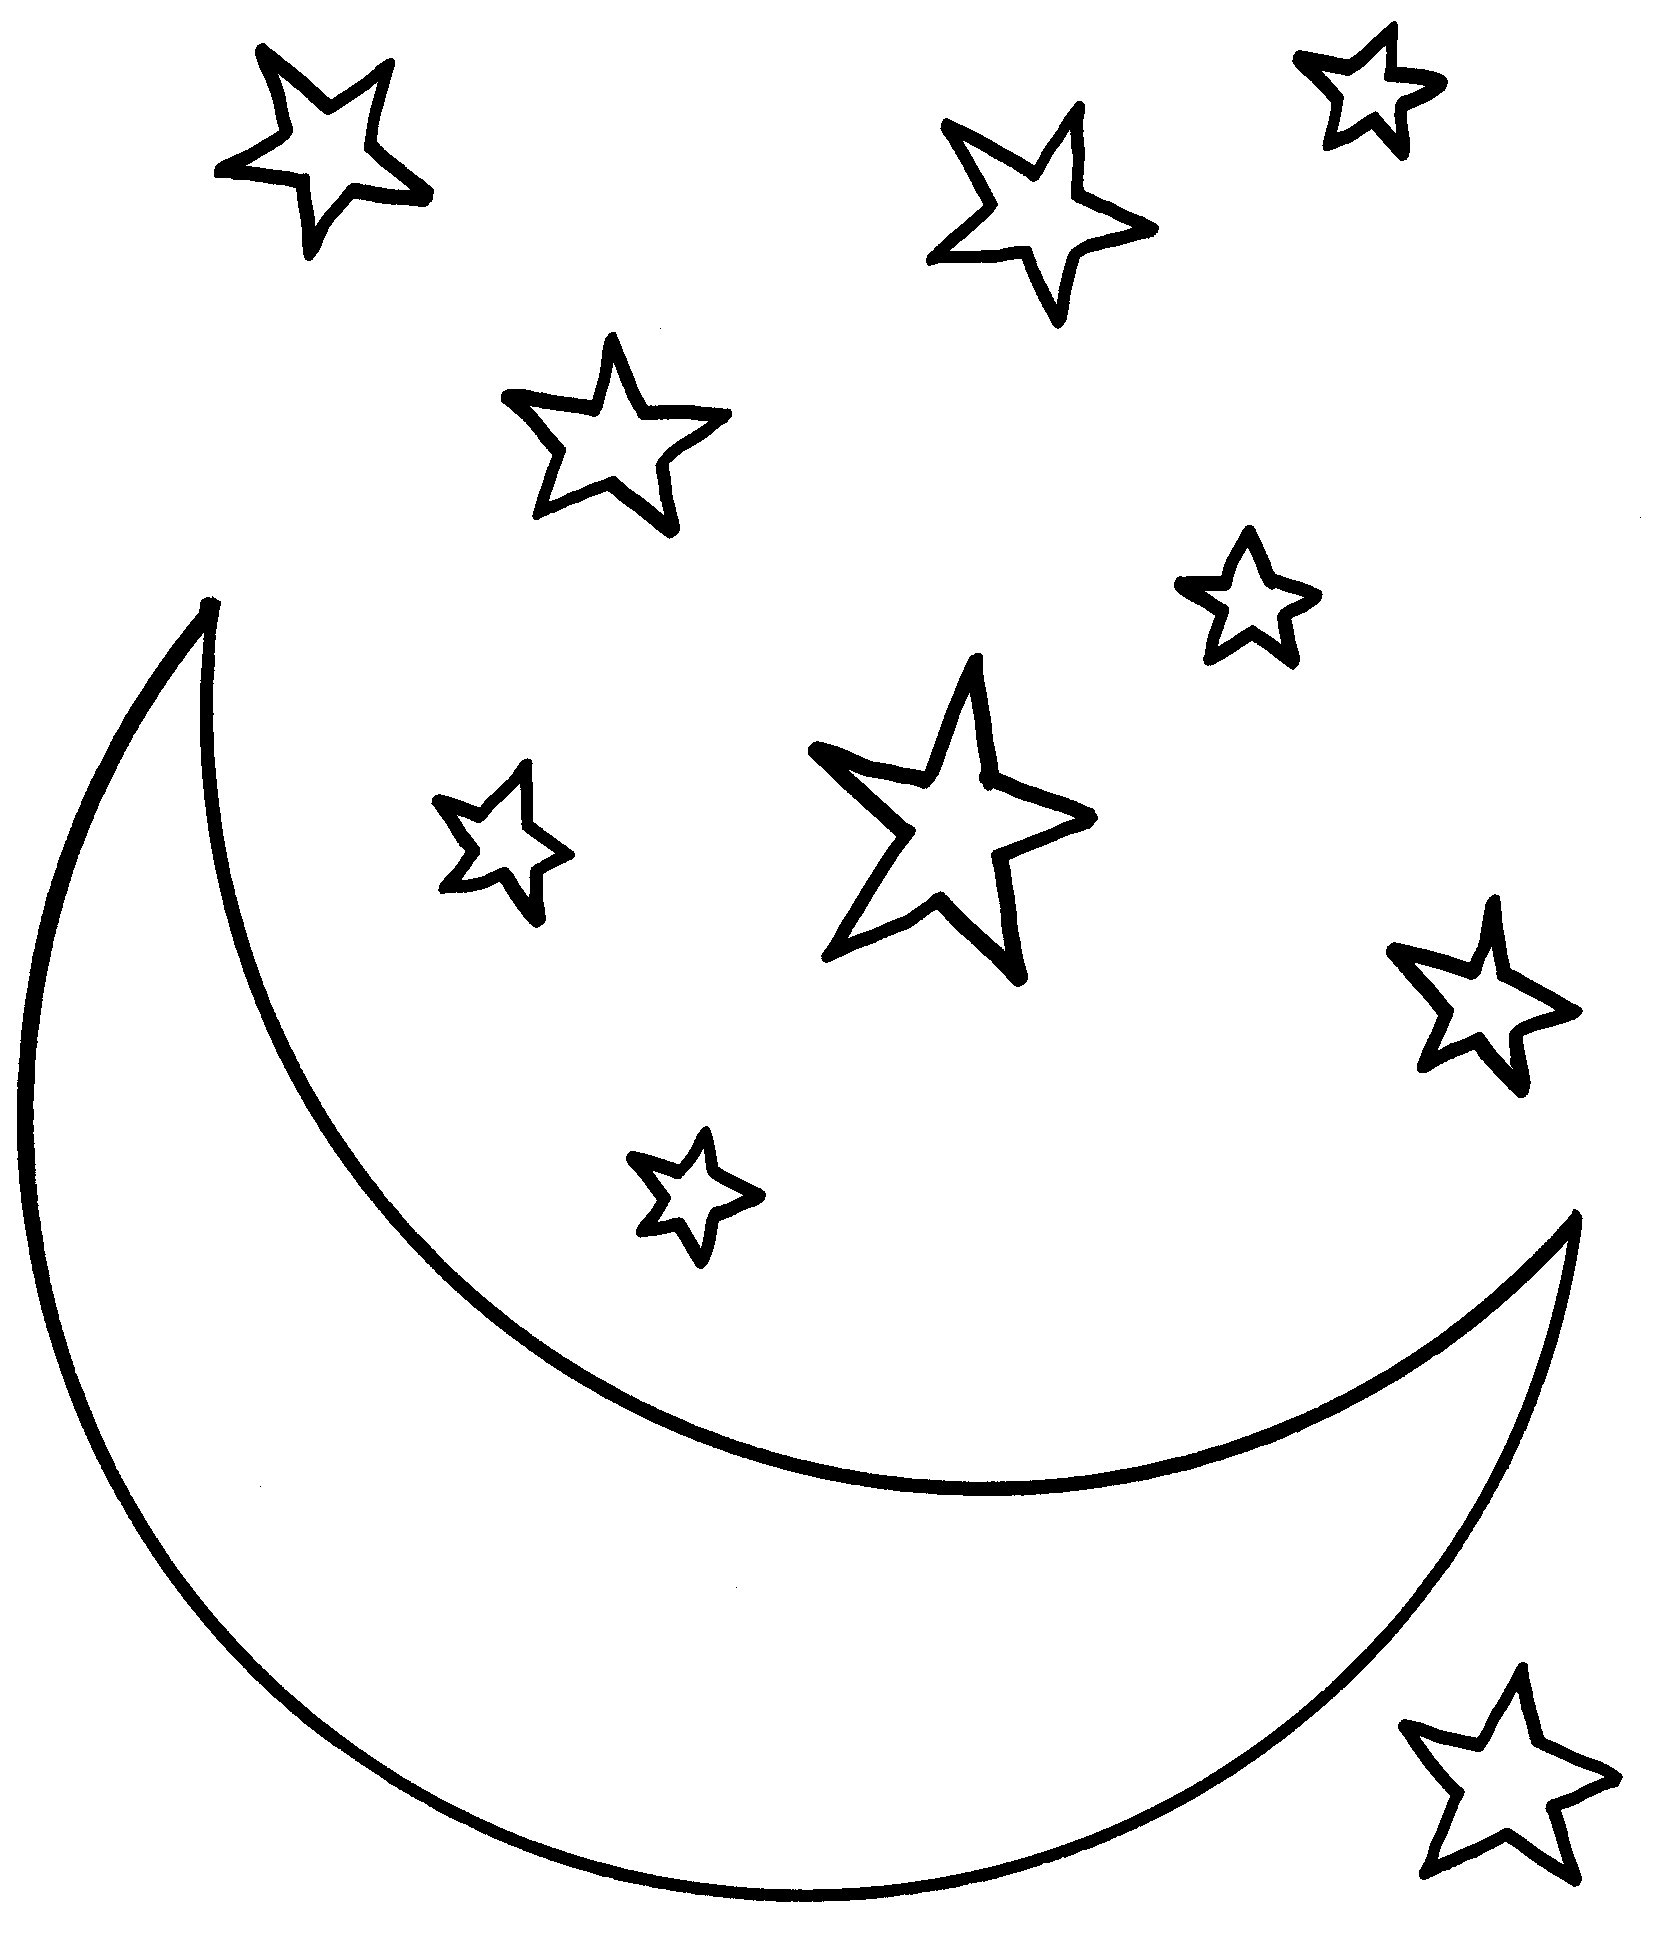 Moon black and white moon clipart 